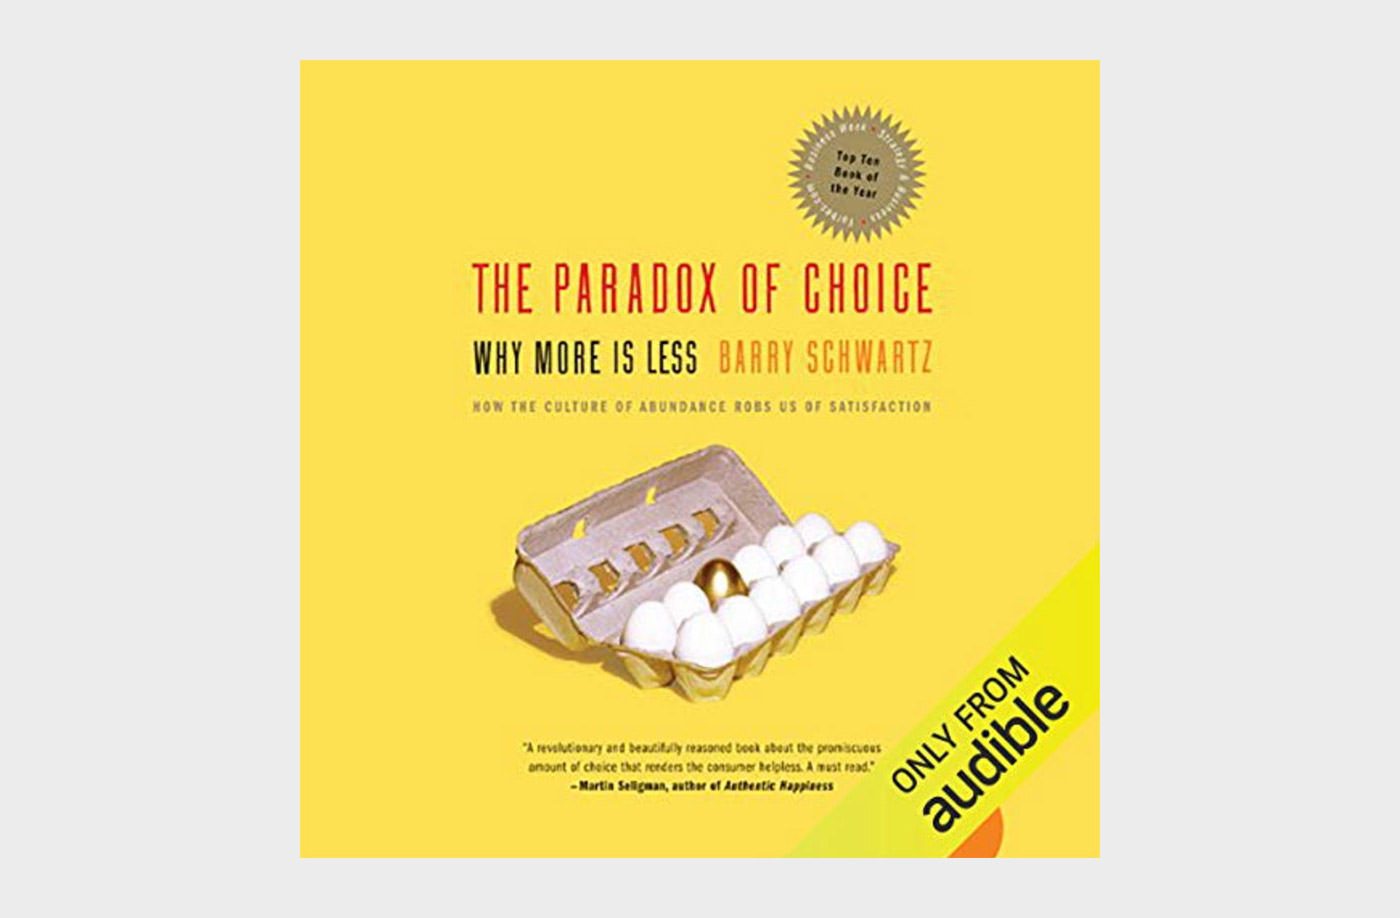 Paradox of Choice: Why more is less